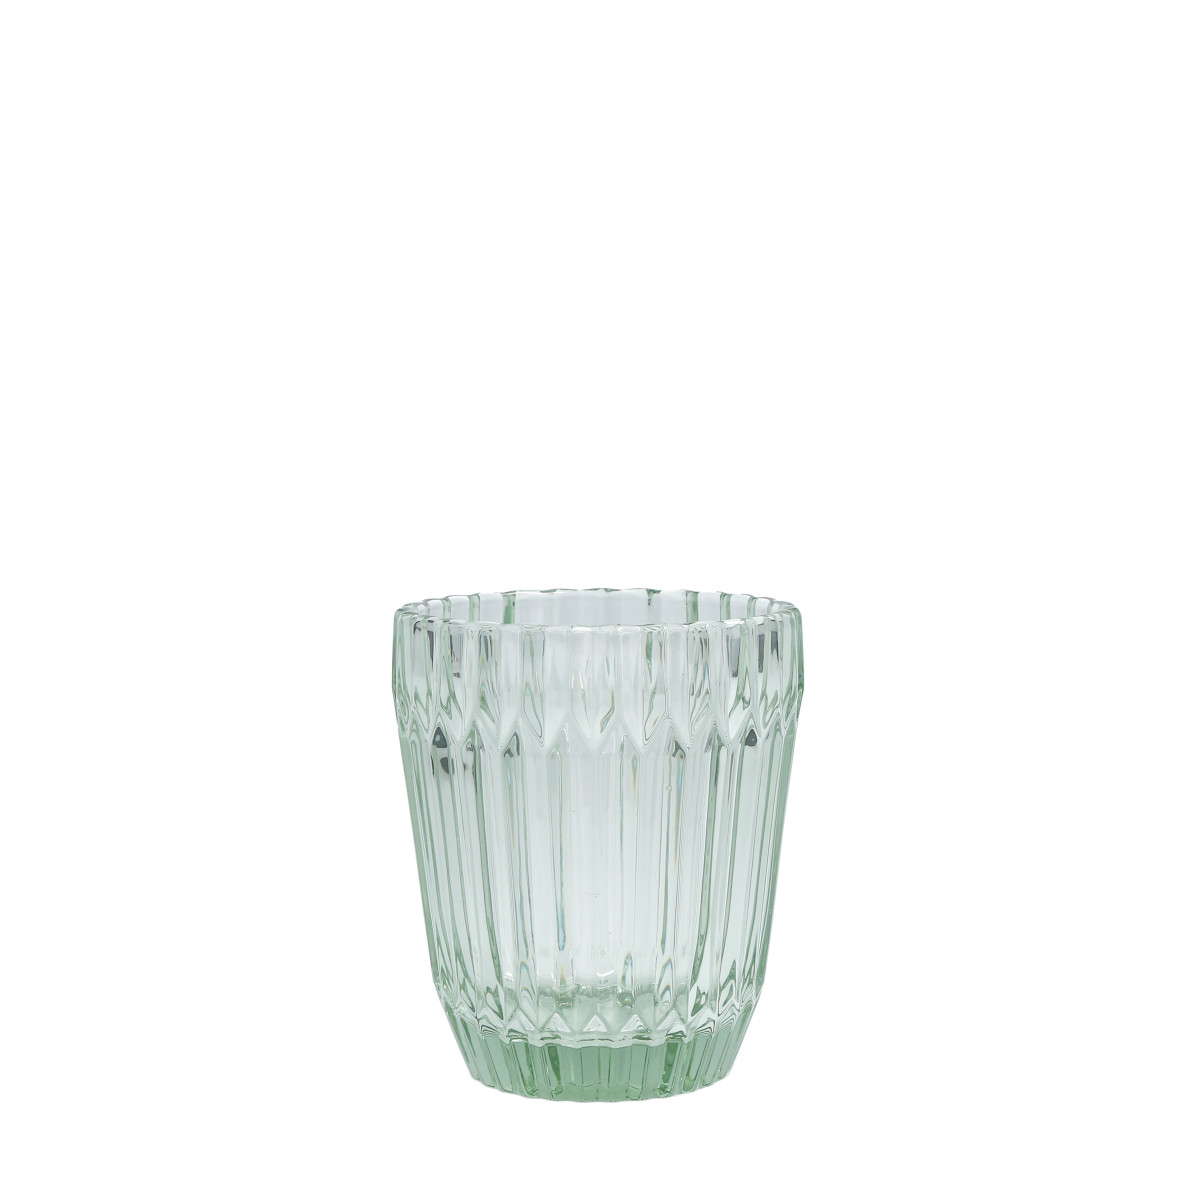 Archie Double Old Fashioned, Sage, Set of 6